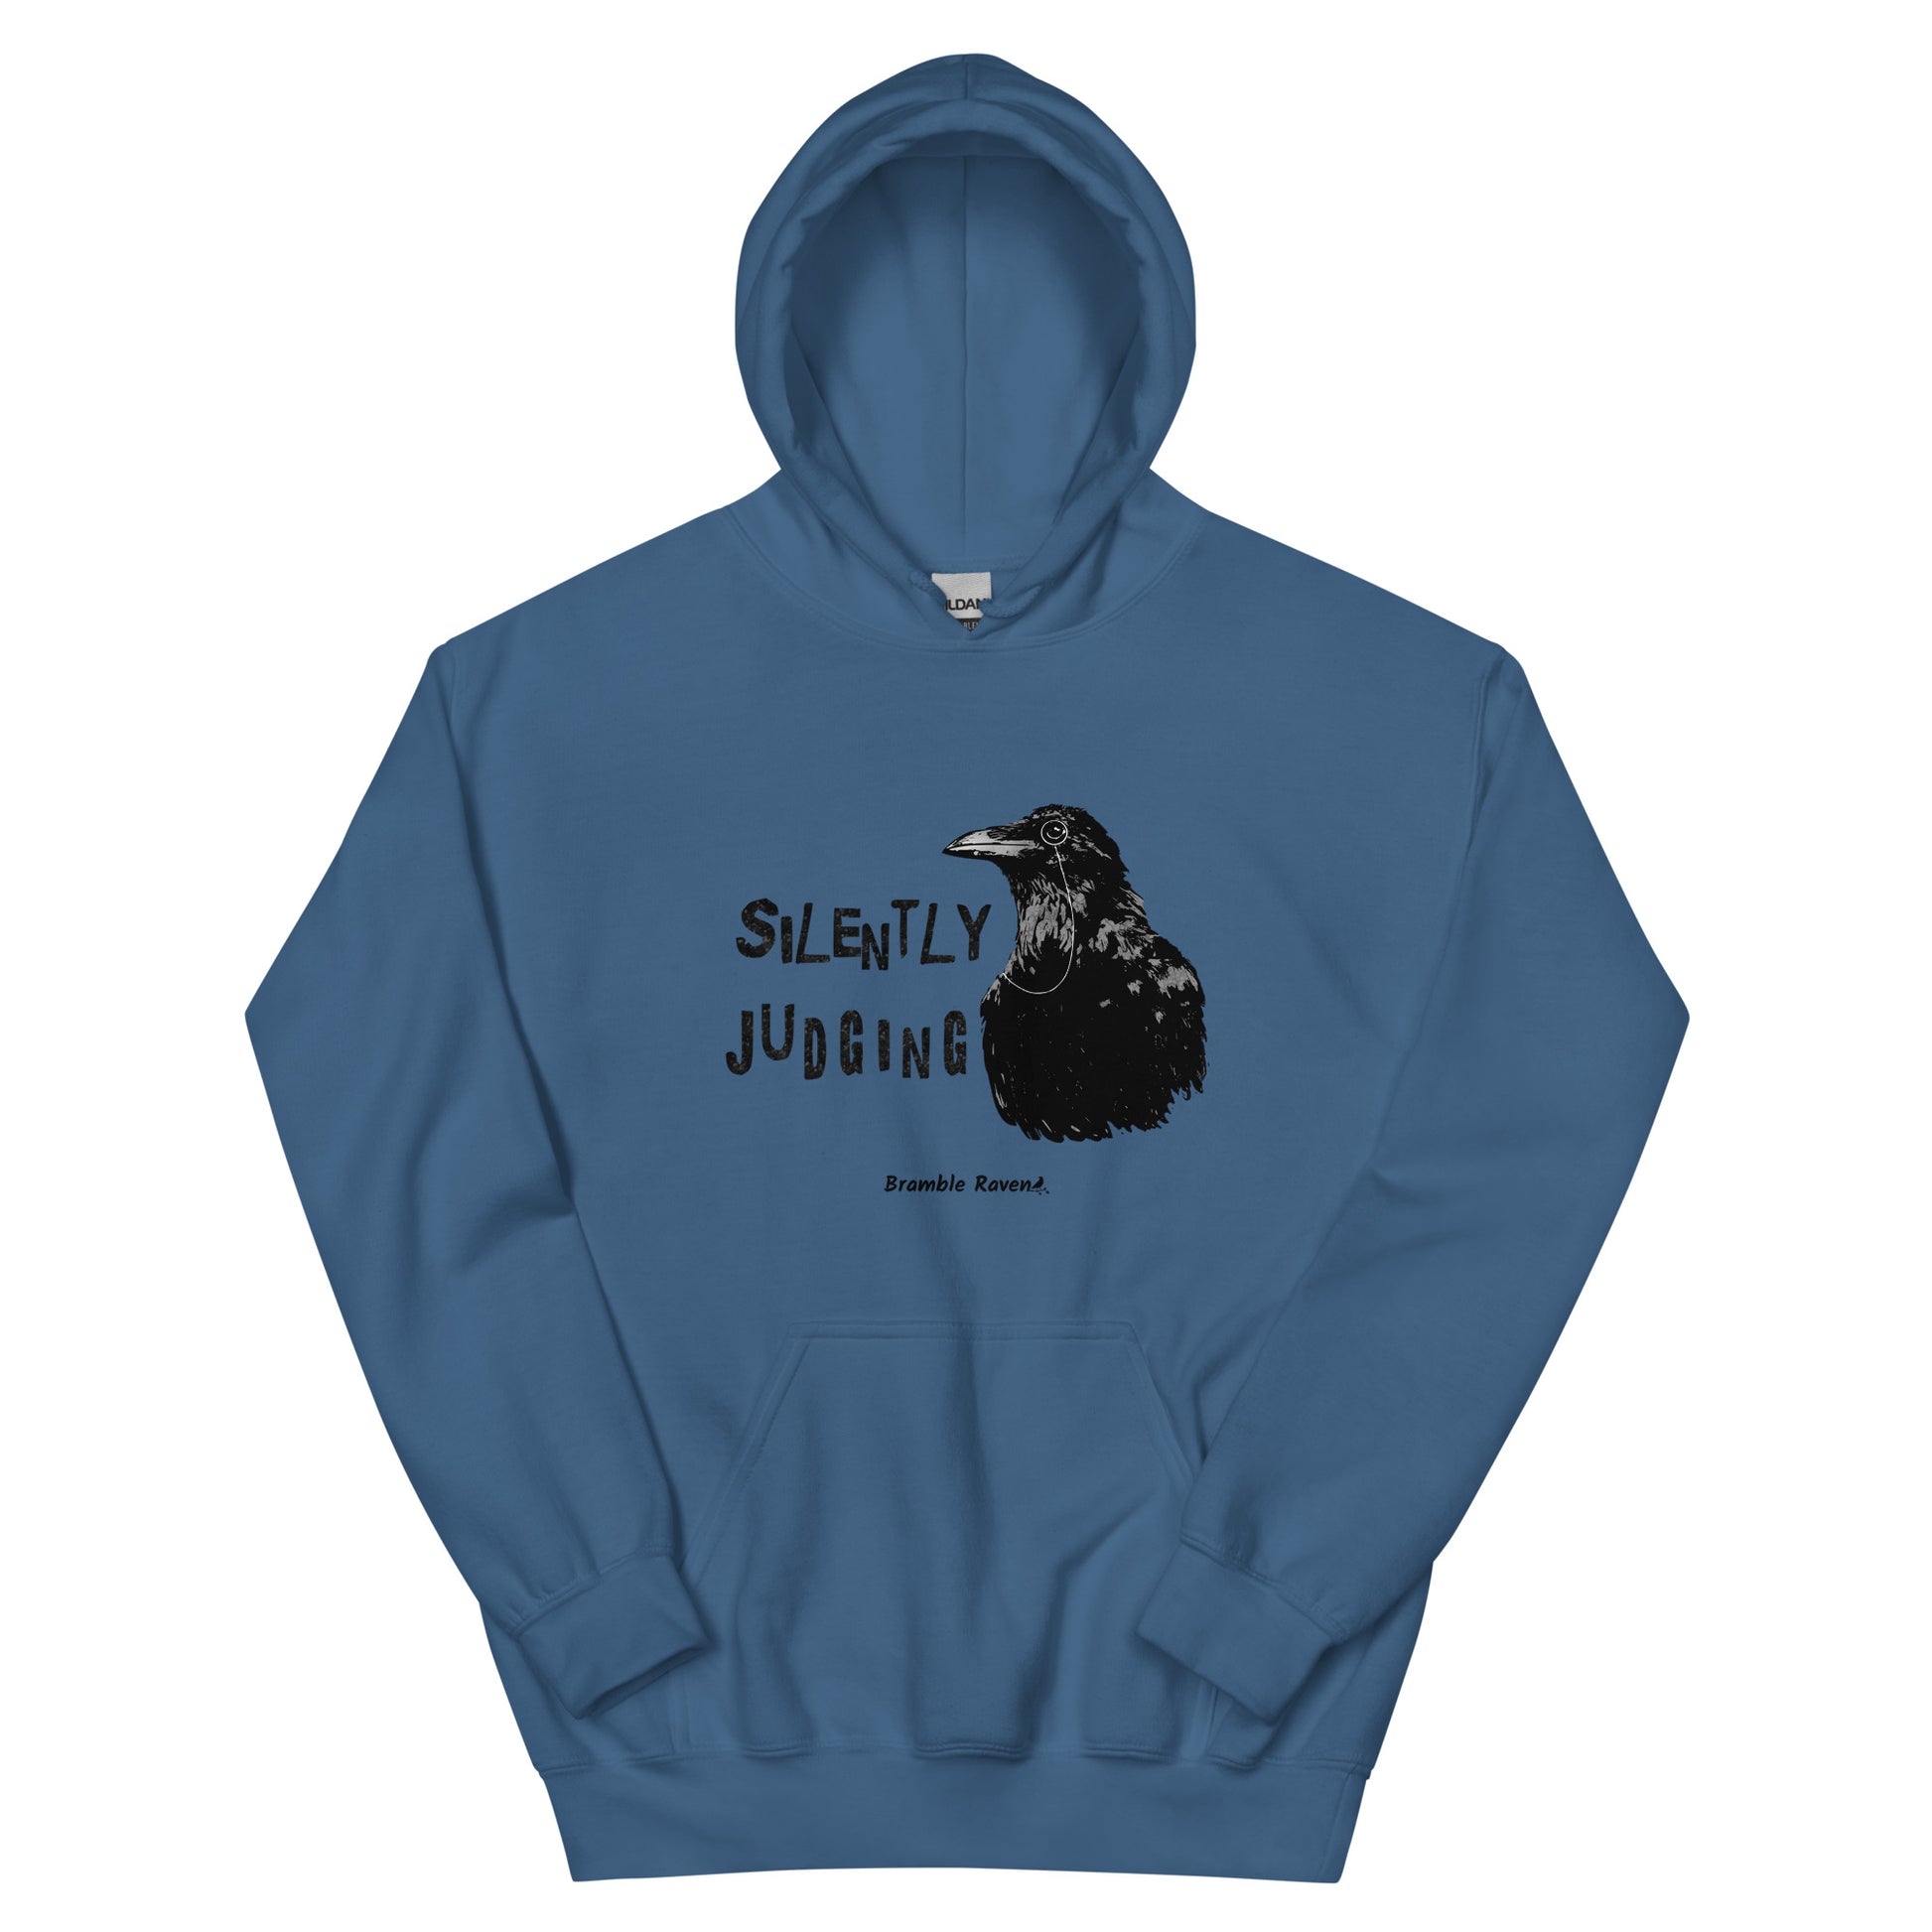 Unisex indigo blue colored hoodie with horizontal design of silently judging text by black crow wearing a monocle.  Design on the front of hoodie. Features double-lined hood and front pouch pocket.